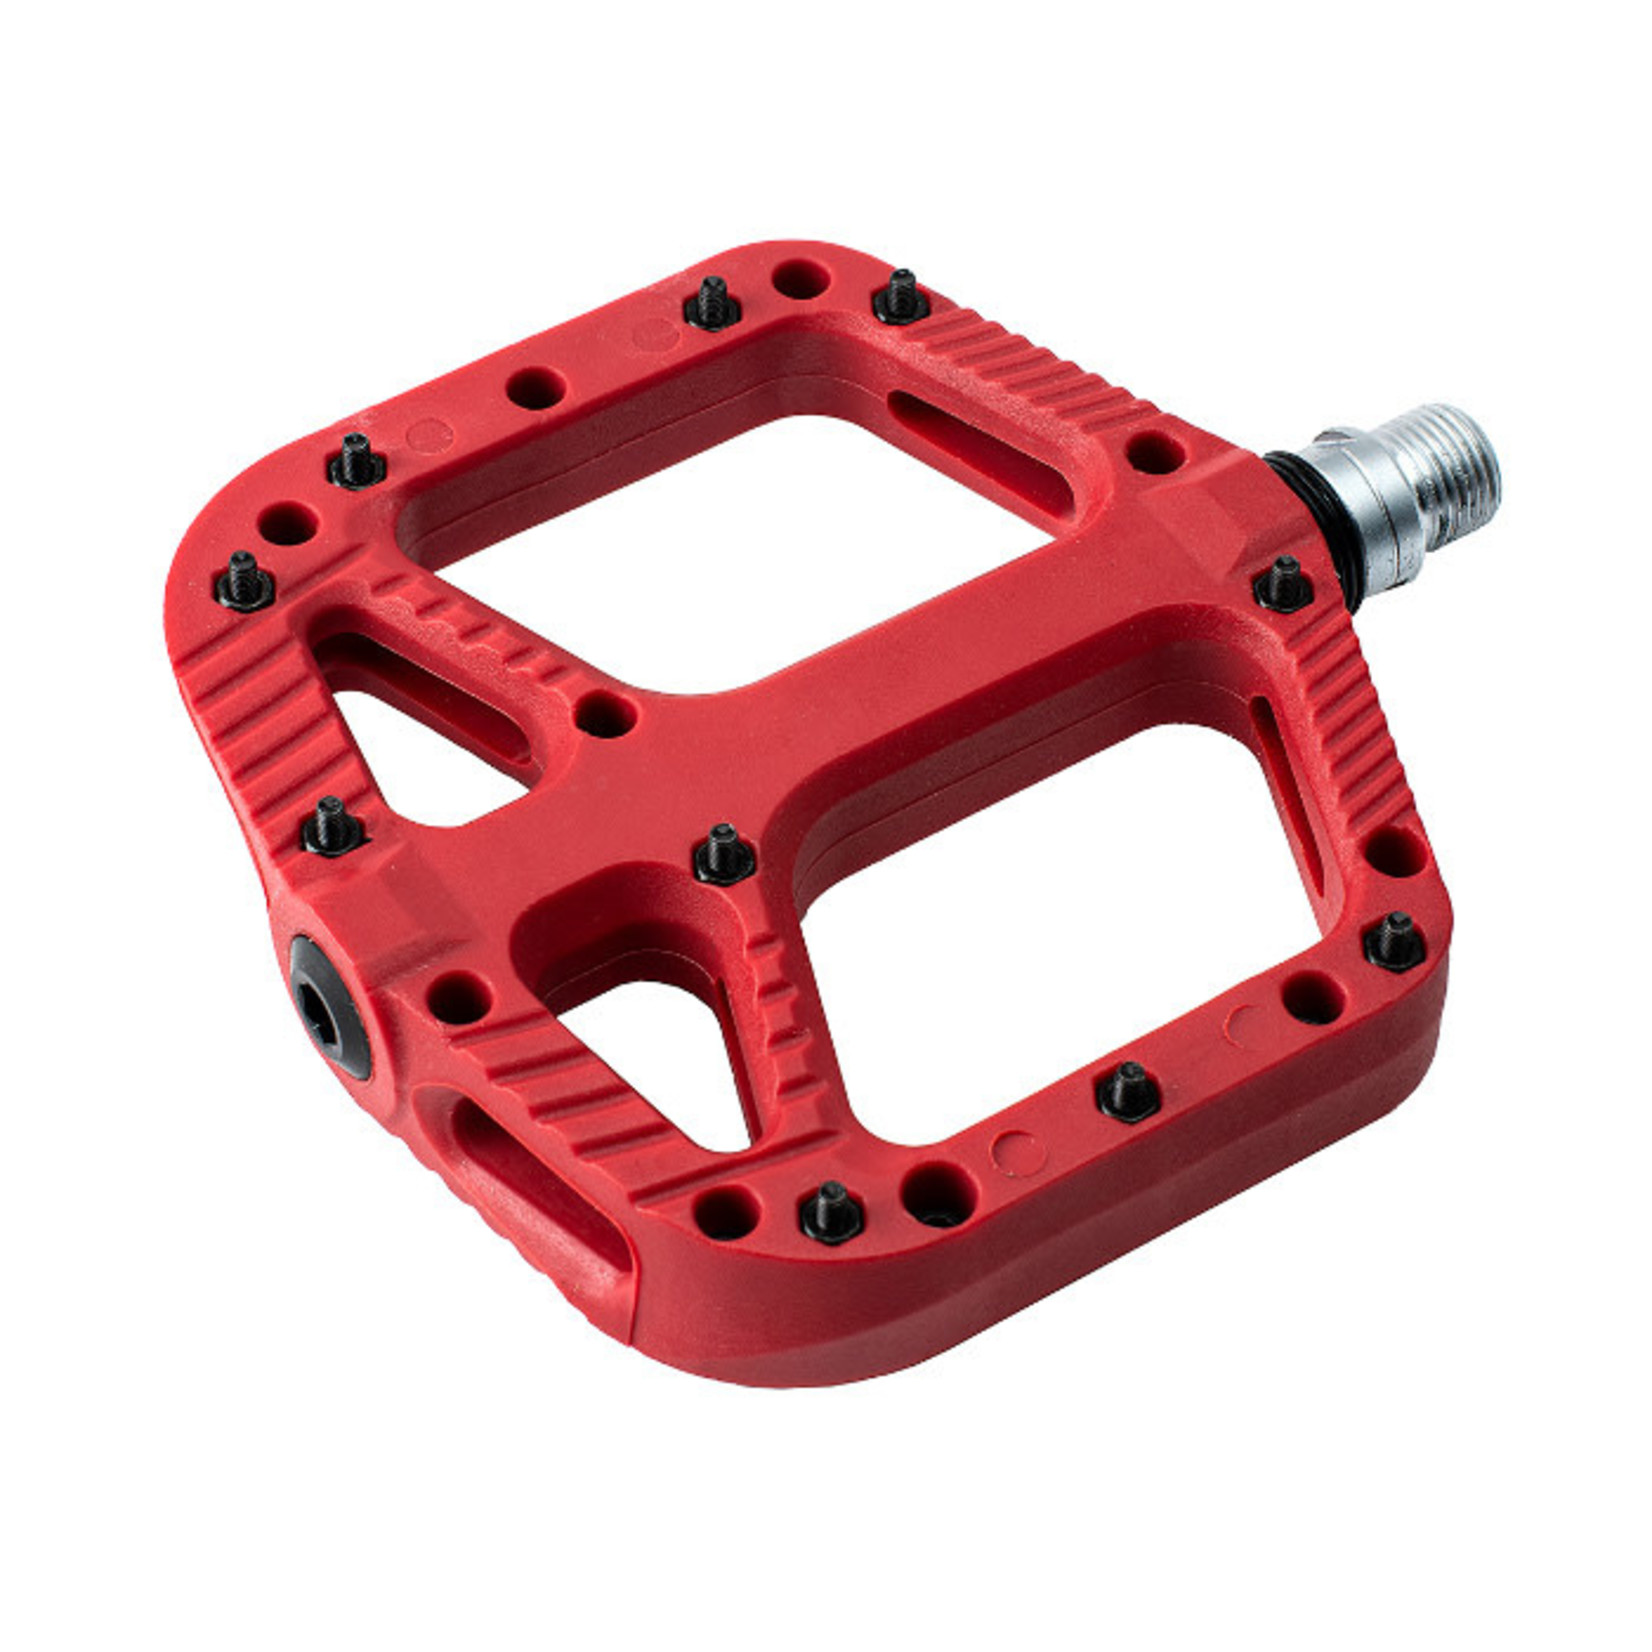 RYFE Nylon Comp Pedal - SASQUATCH - Sealed Bearing, Removable Pins, RED